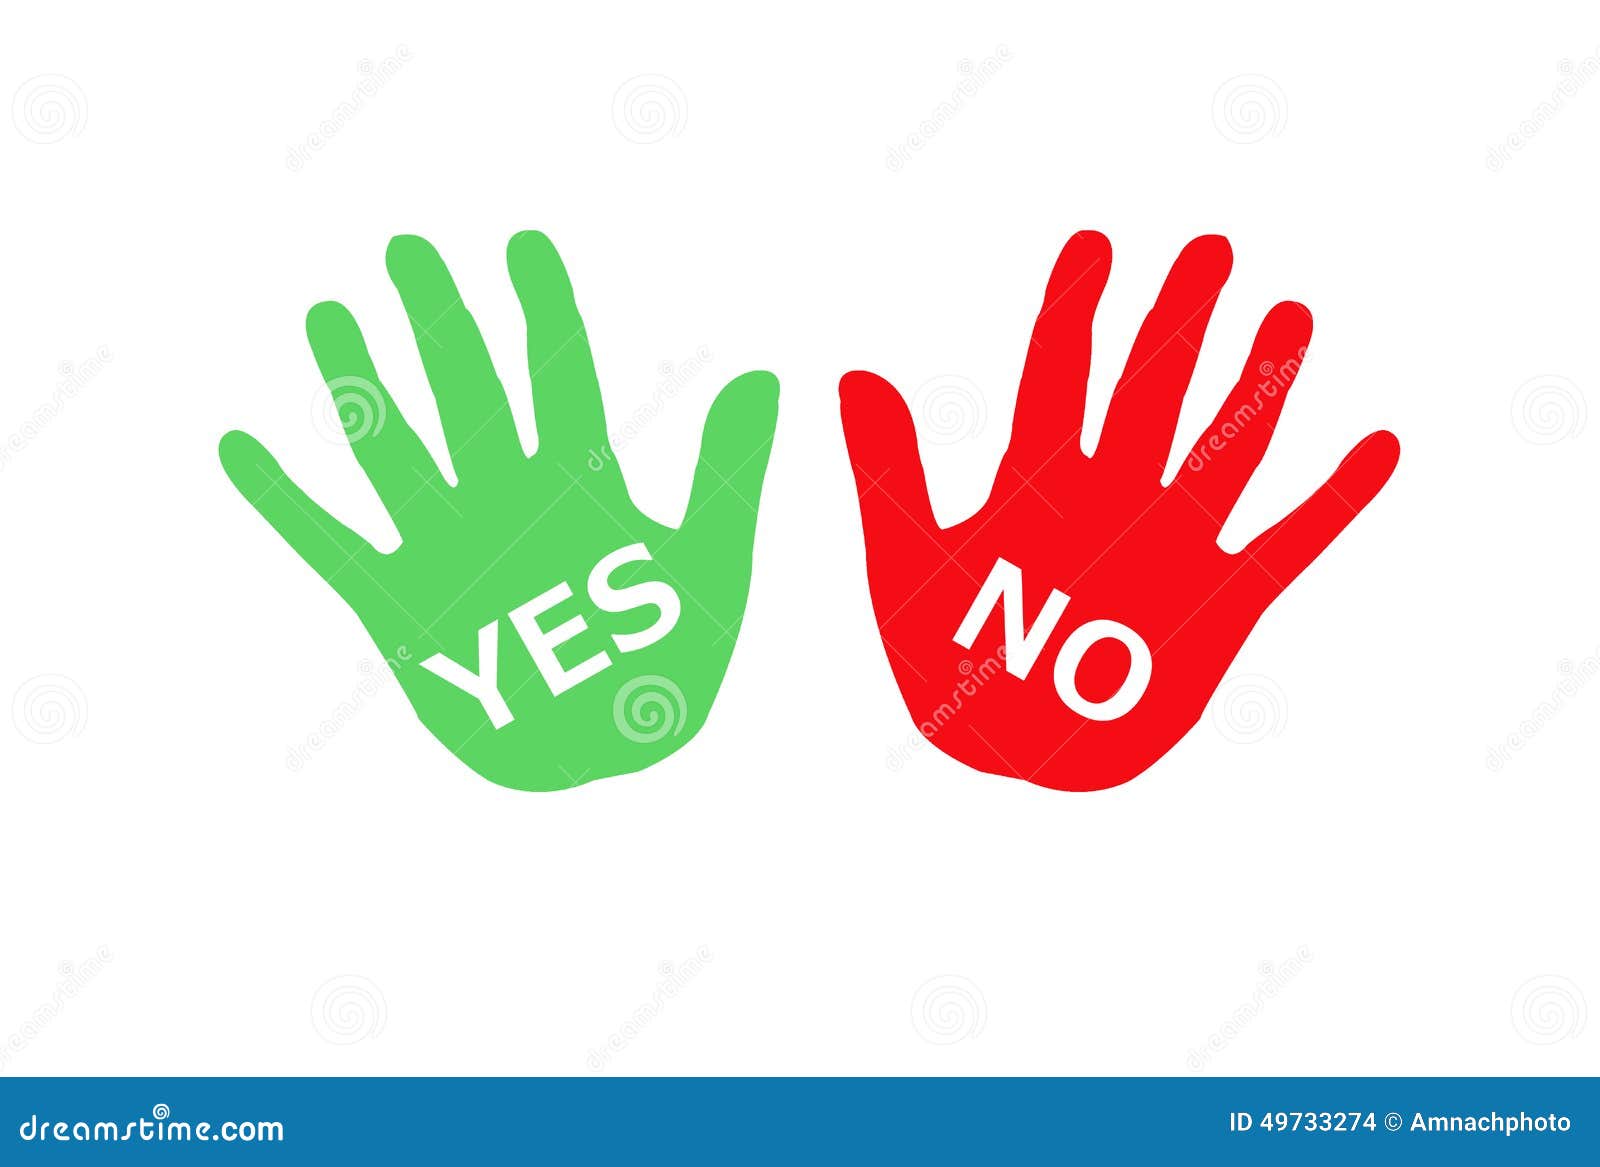 clipart for yes and no - photo #15